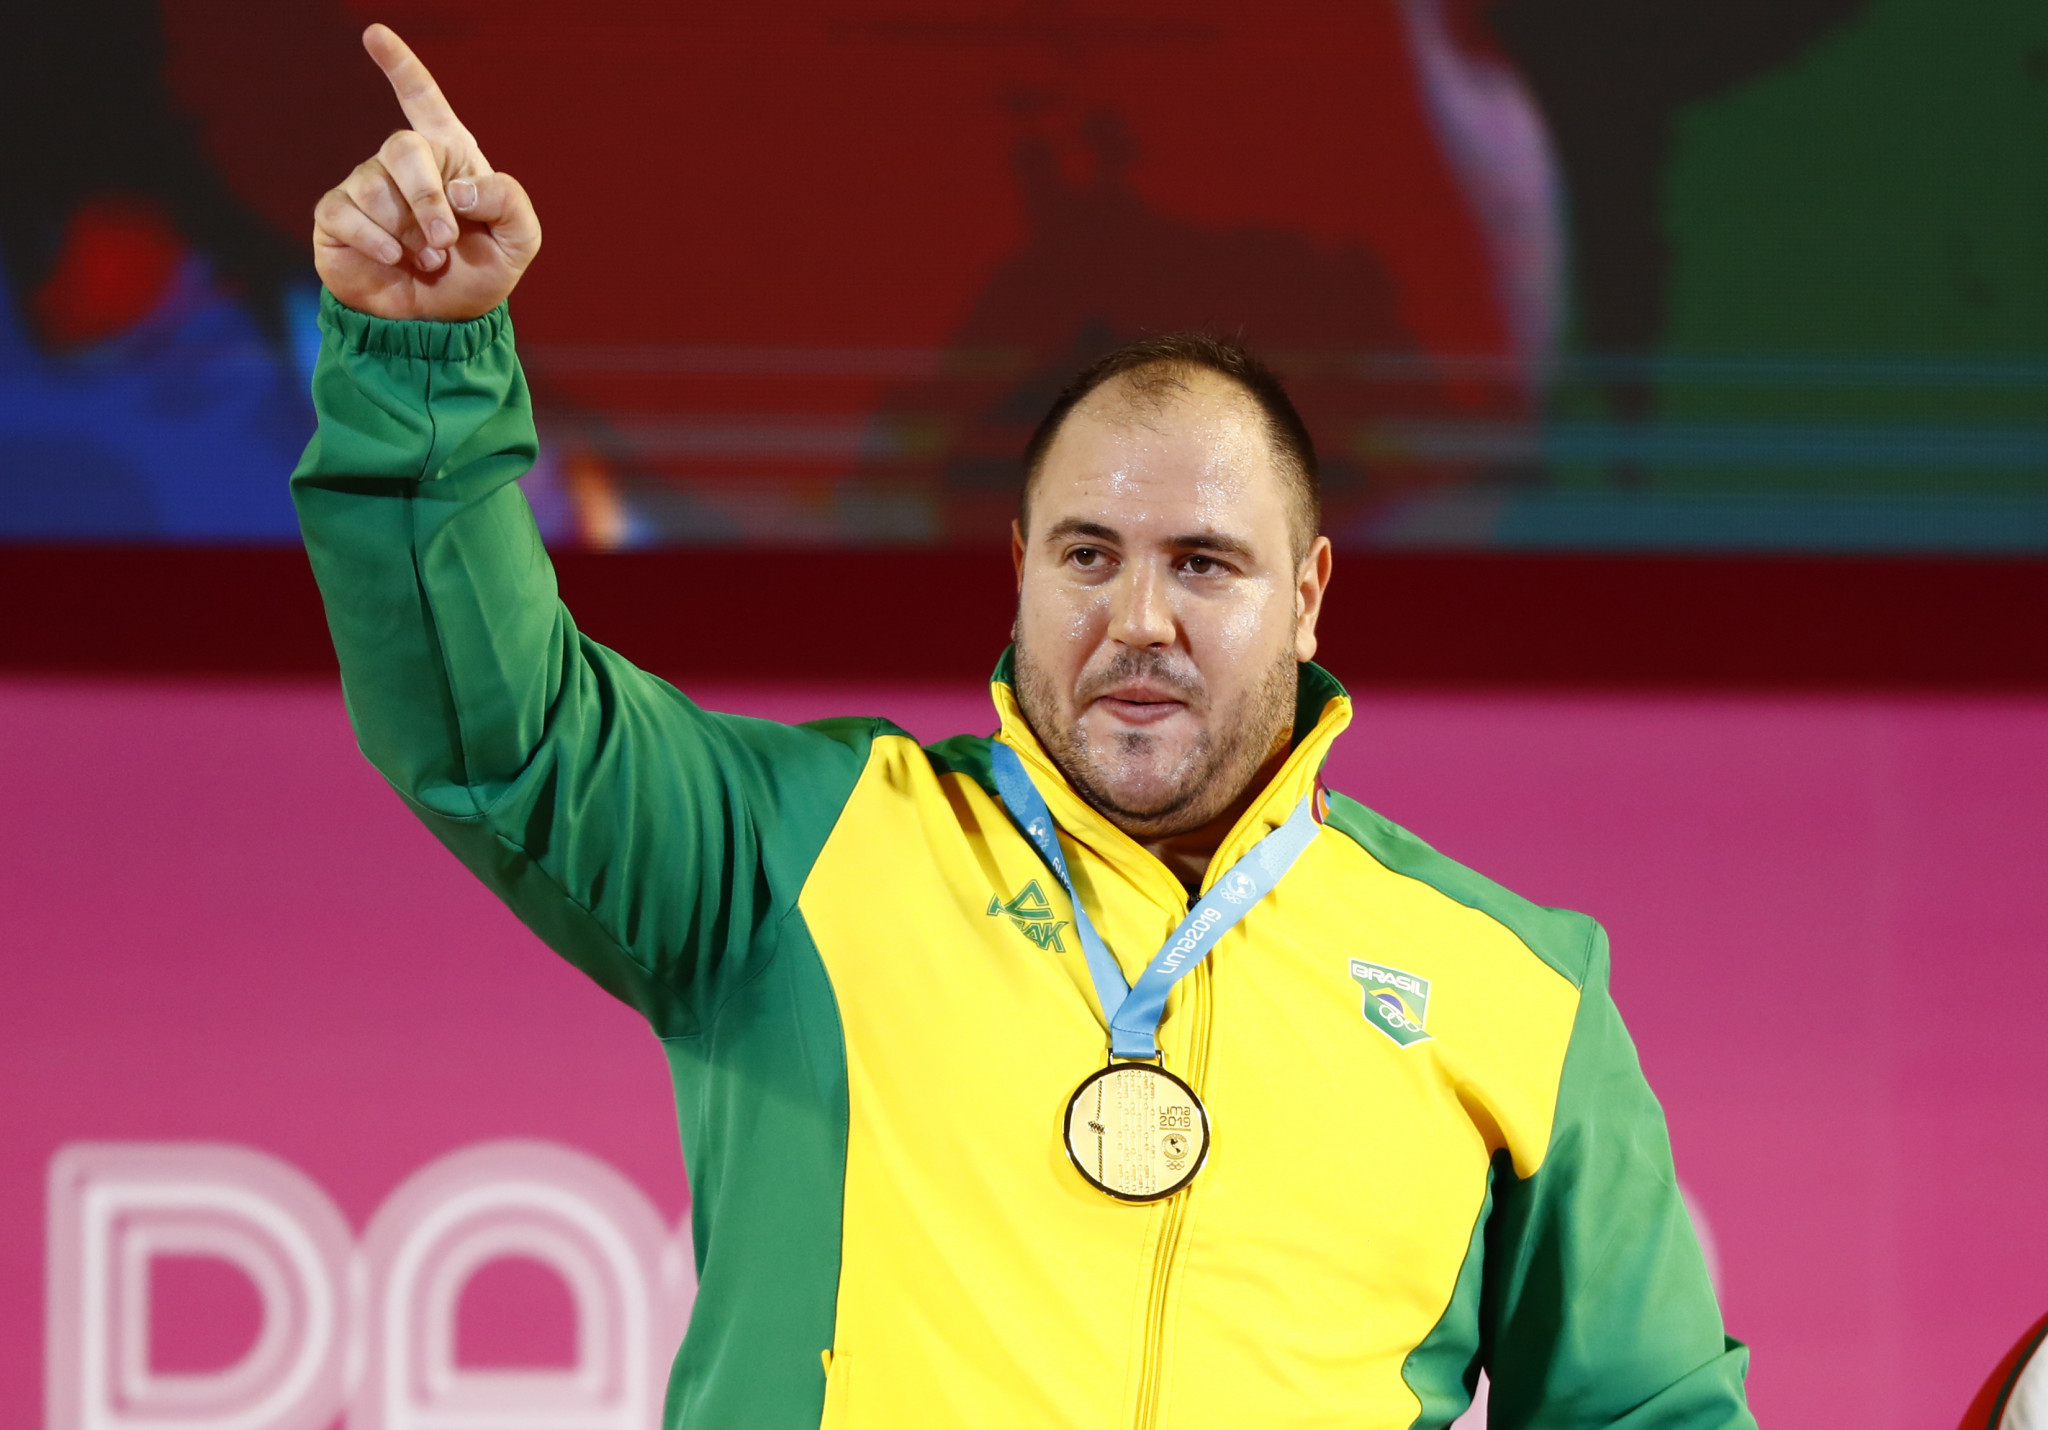 Fernando Saraiva Reis of Brazil claimed his third Pan American Games weightlifting title at Lima 2019 ©Lima 2019